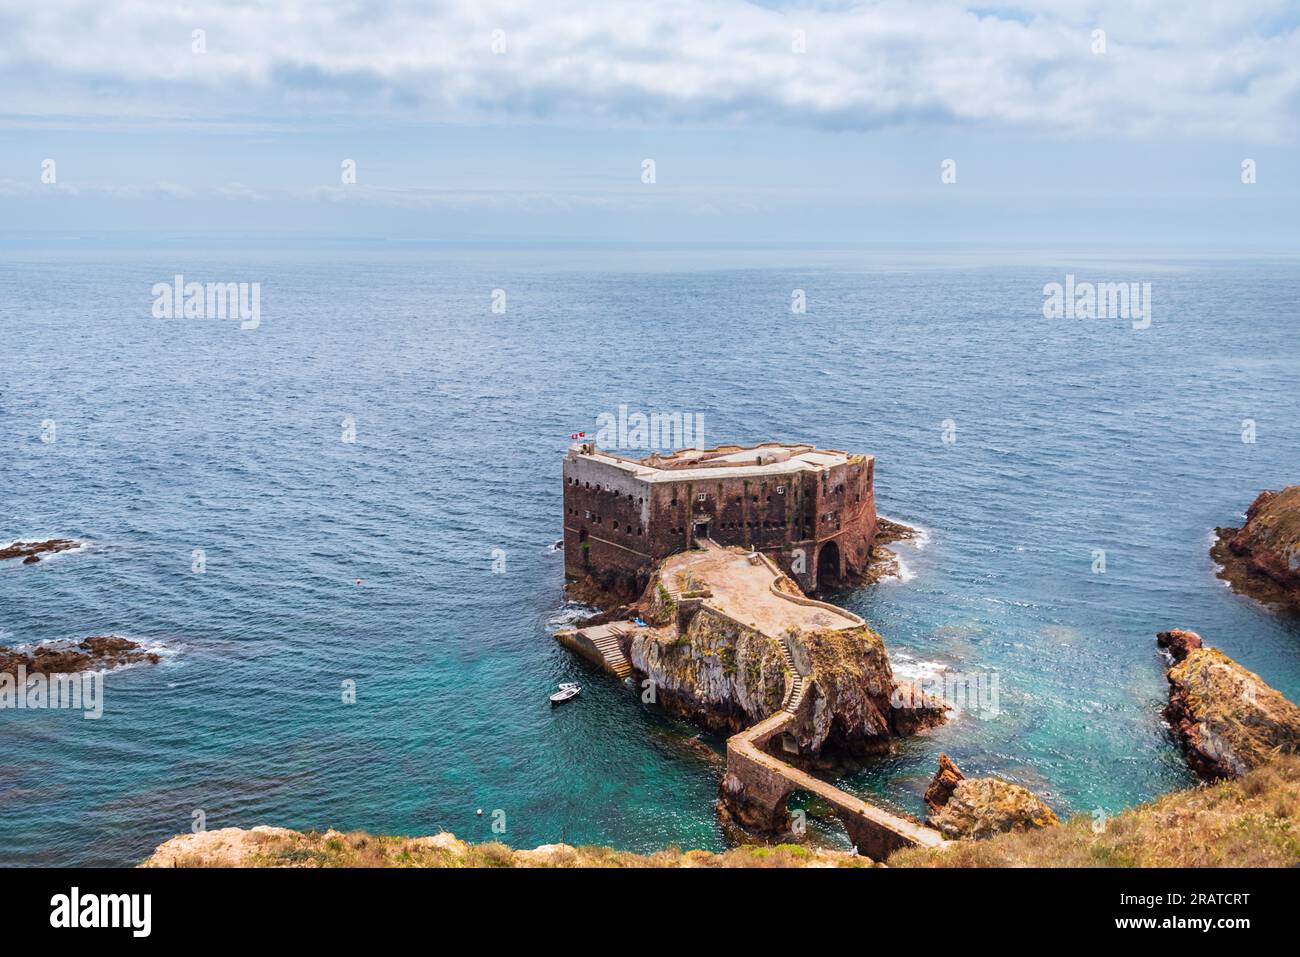 Berlengas Fortress or Fort of Saint John the Baptist, in the Berlengas archipelago. Stock Photo